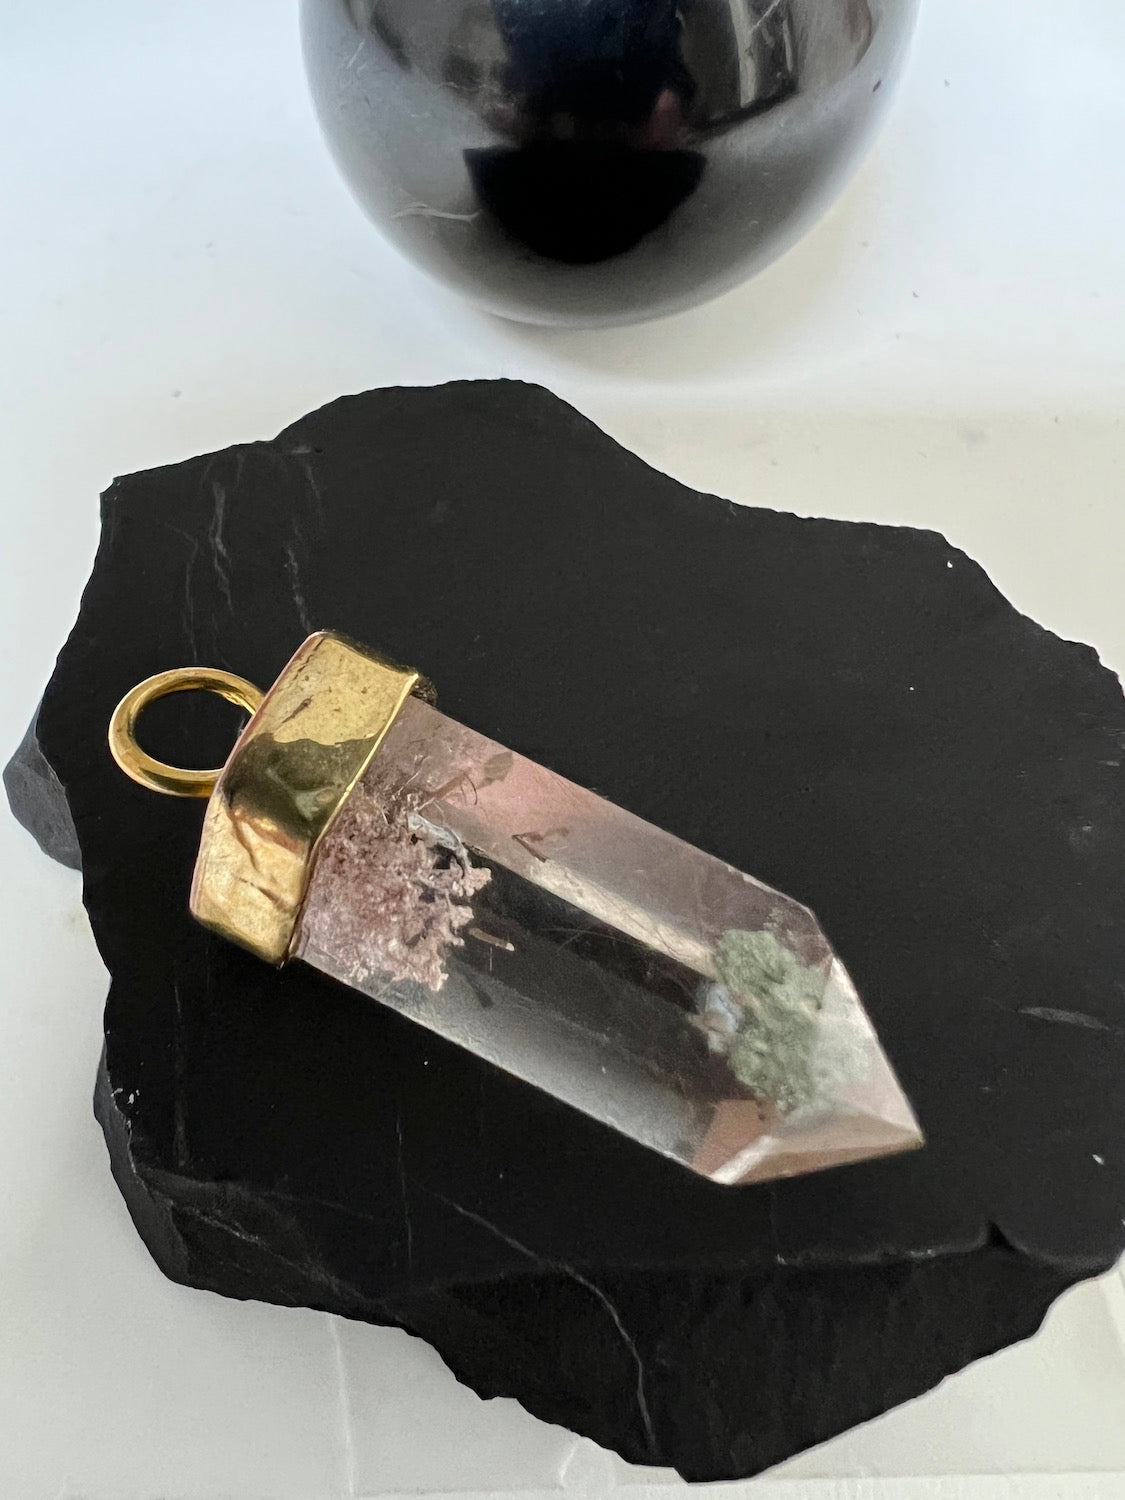 Unique Crystal with chlorite and Moss  inclusions